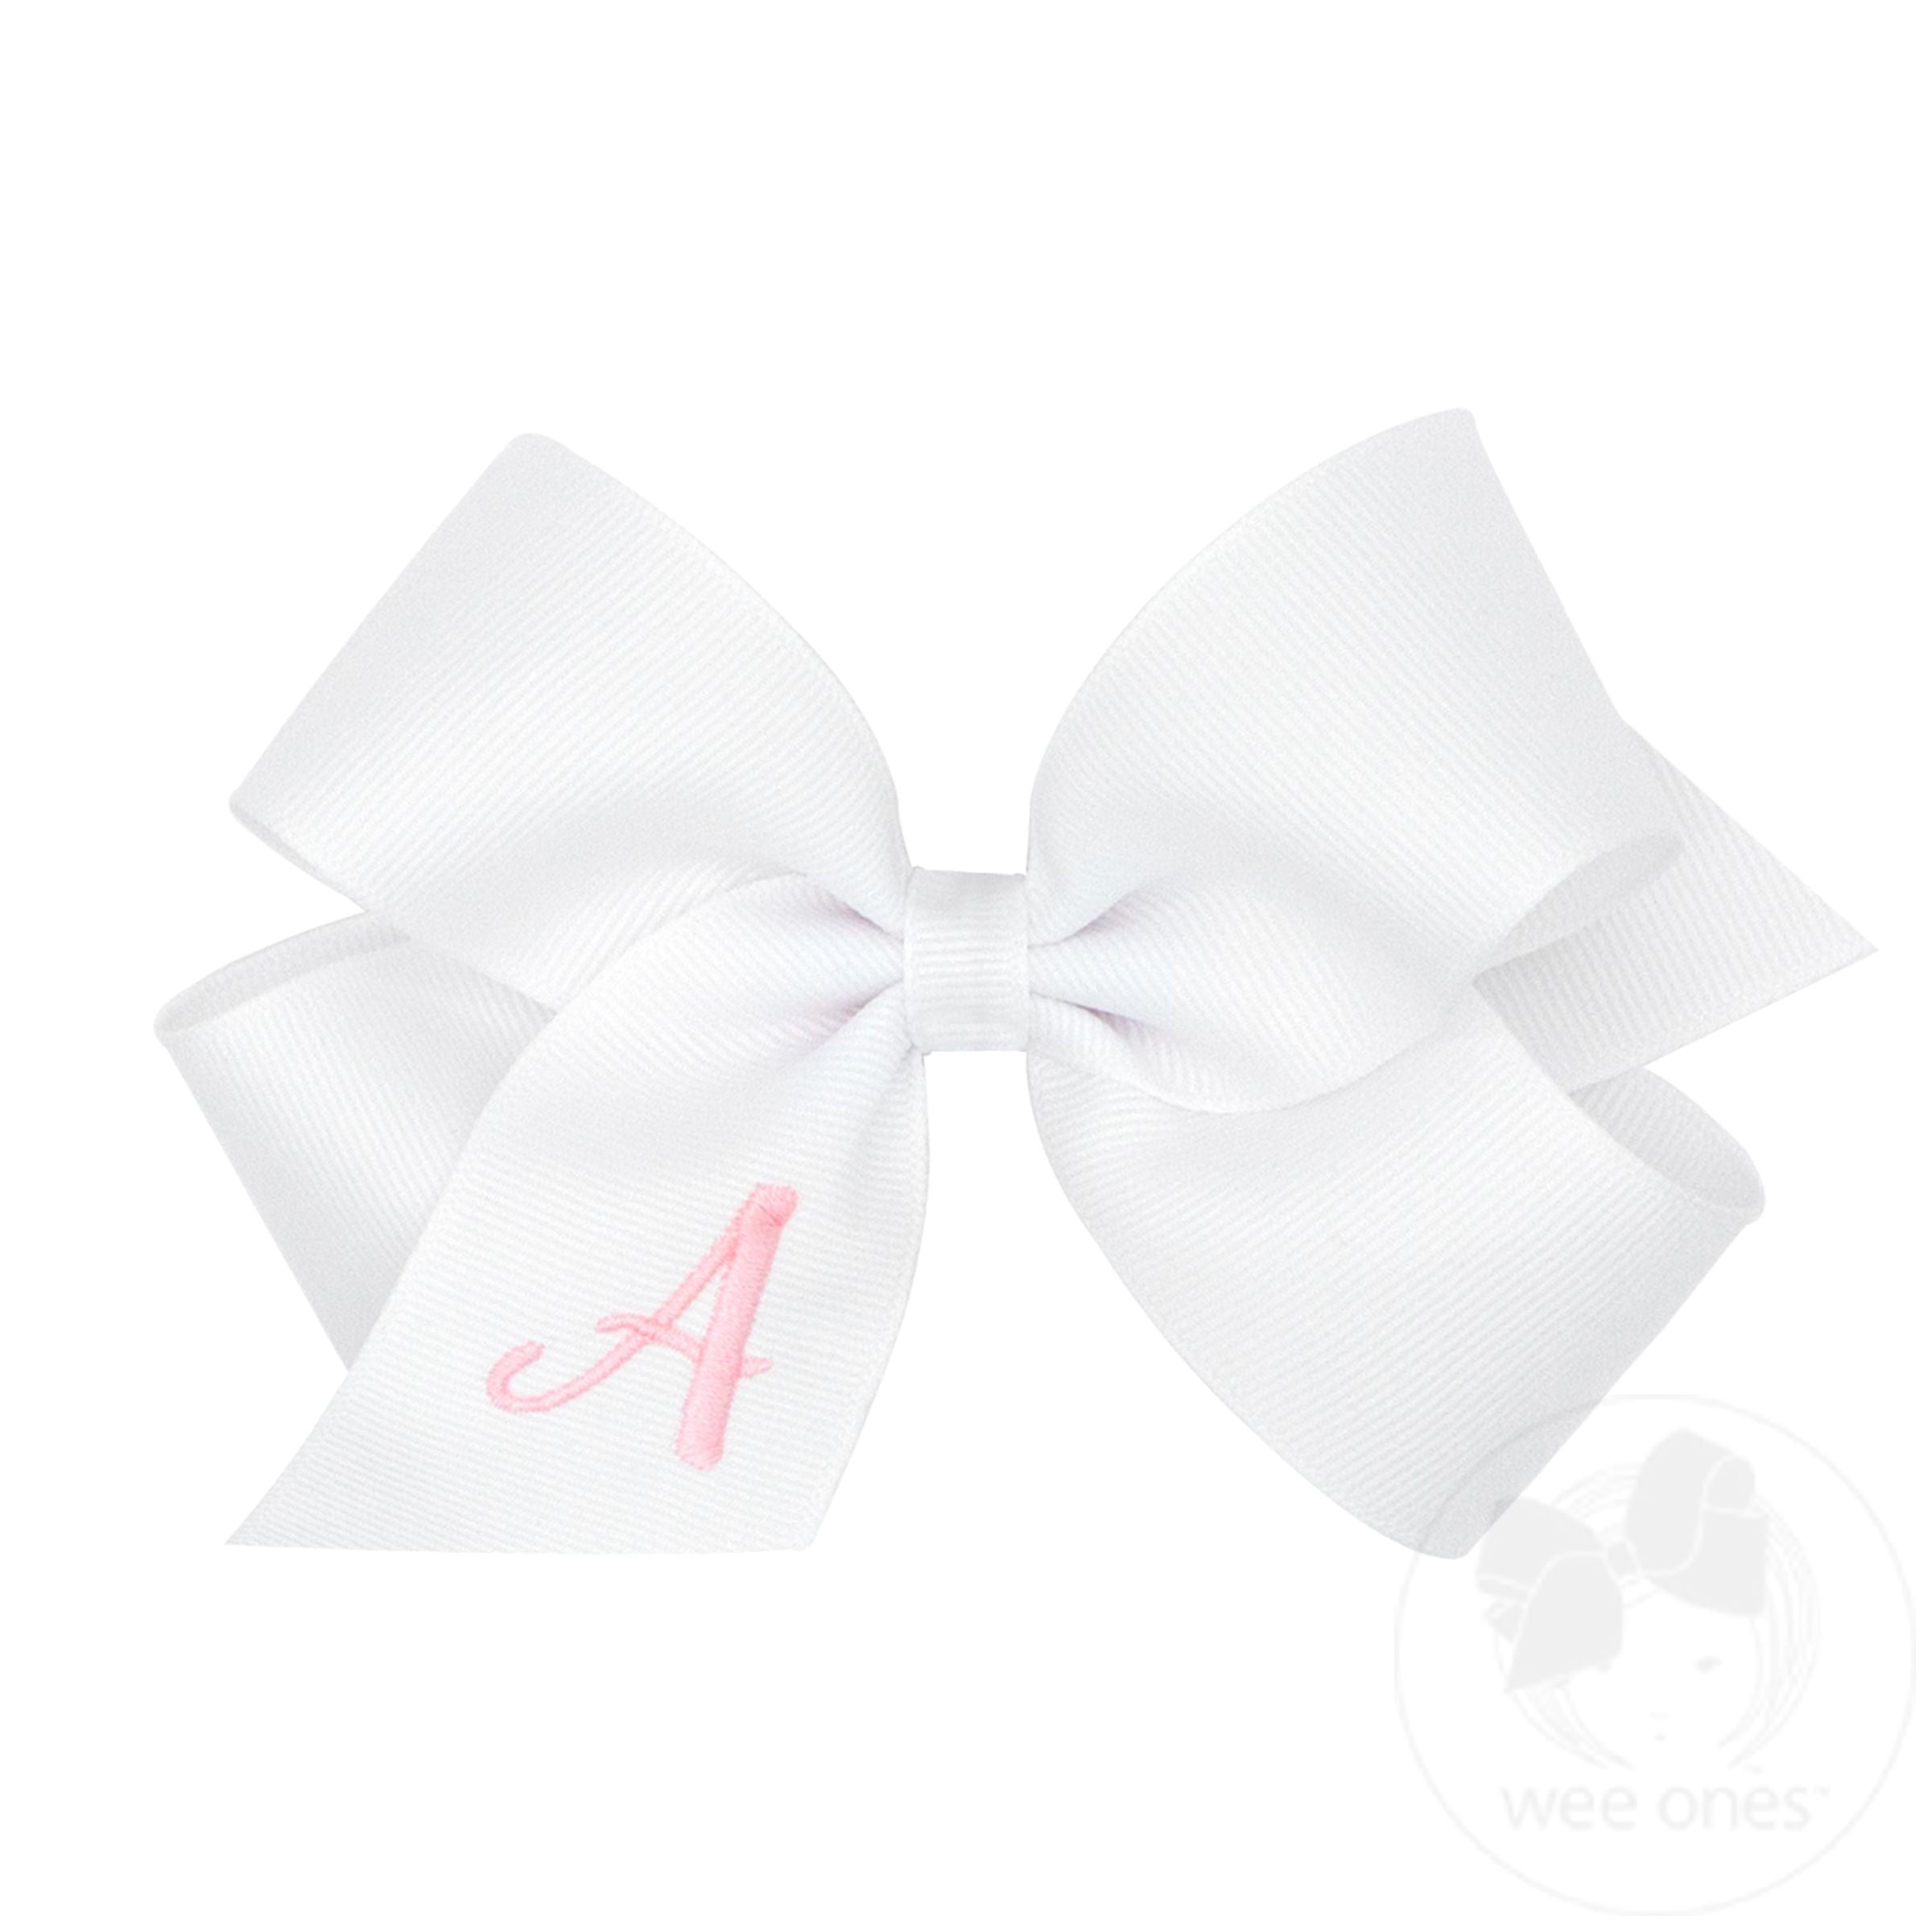 Wee Ones Medium Monogrammed Grosgrain Girls Hair Bow - White with Light Pink Initial D